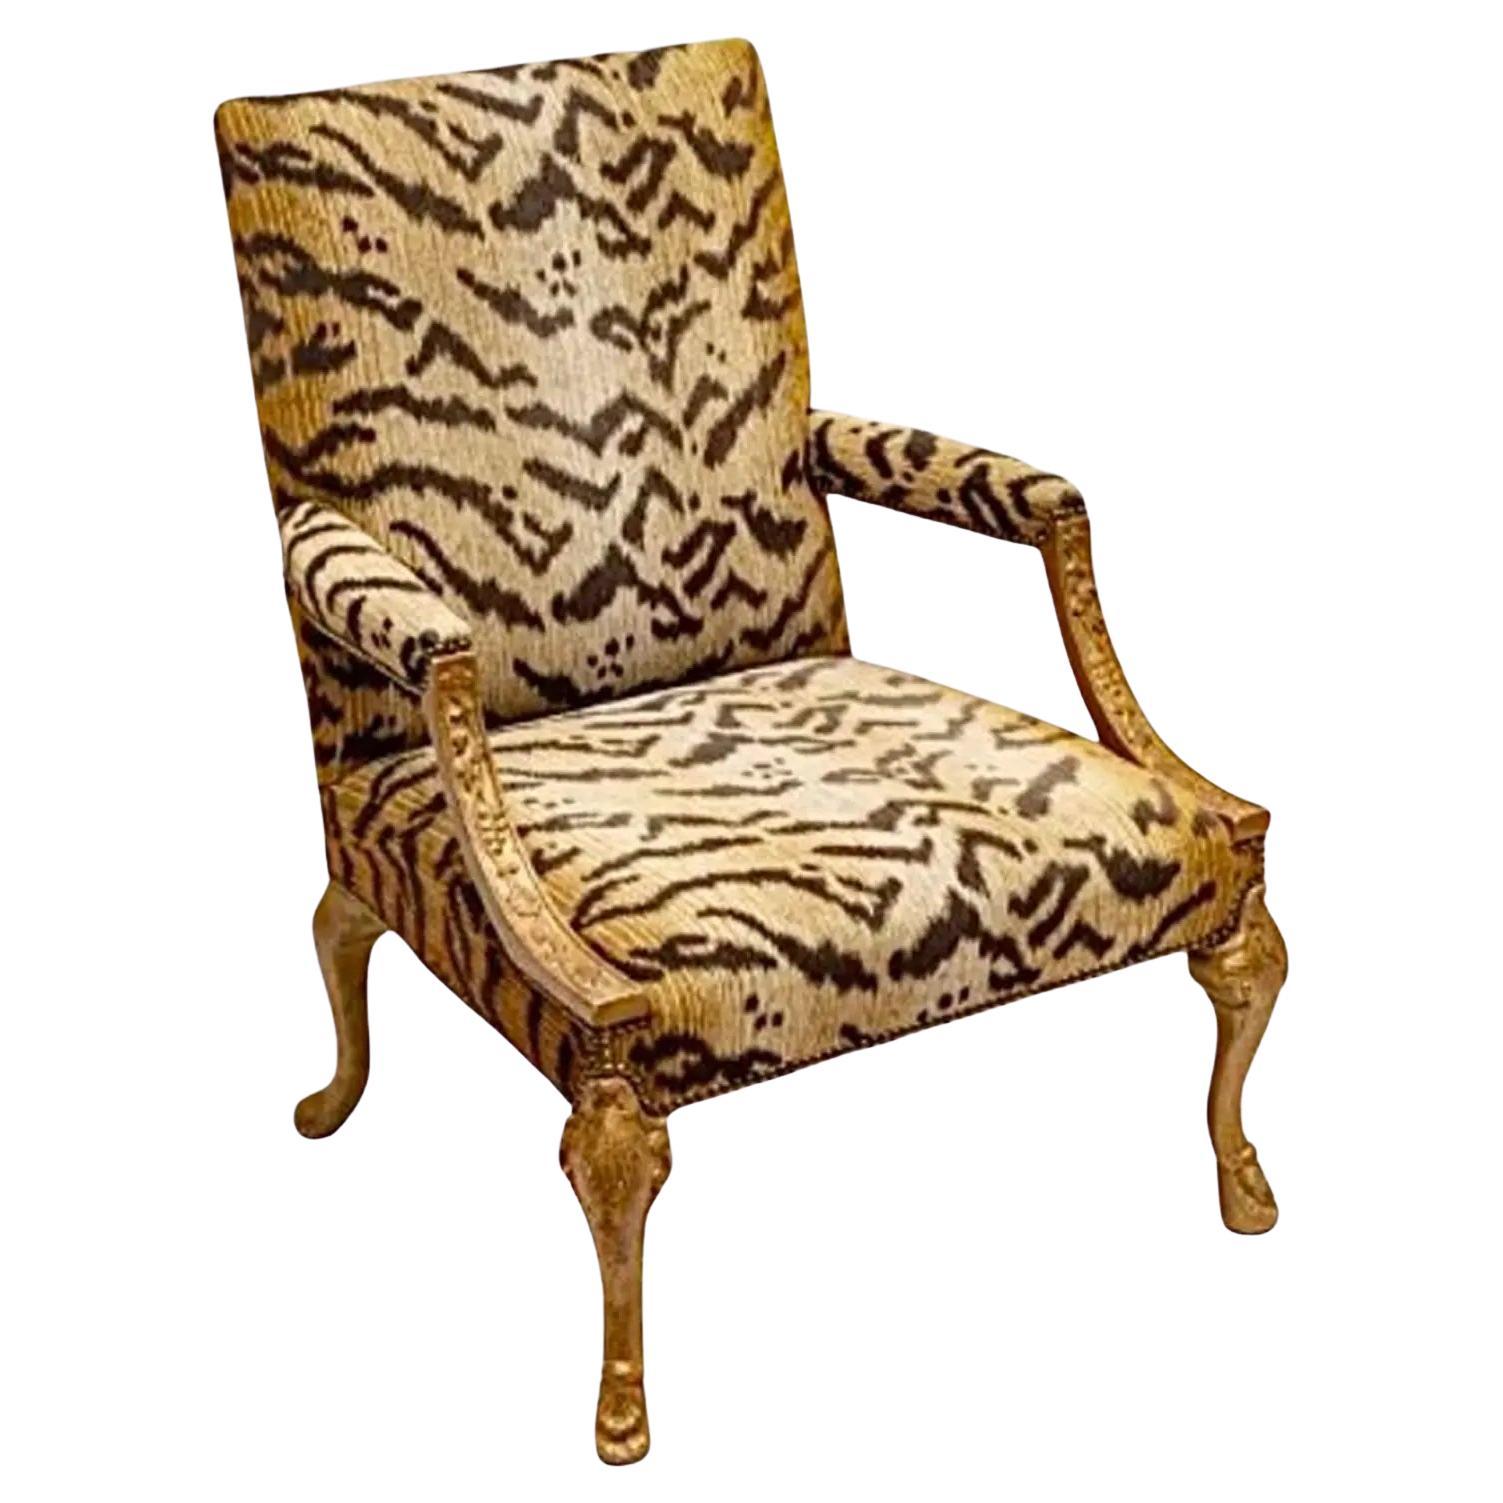 Minton-Spidell Lounge Chairs